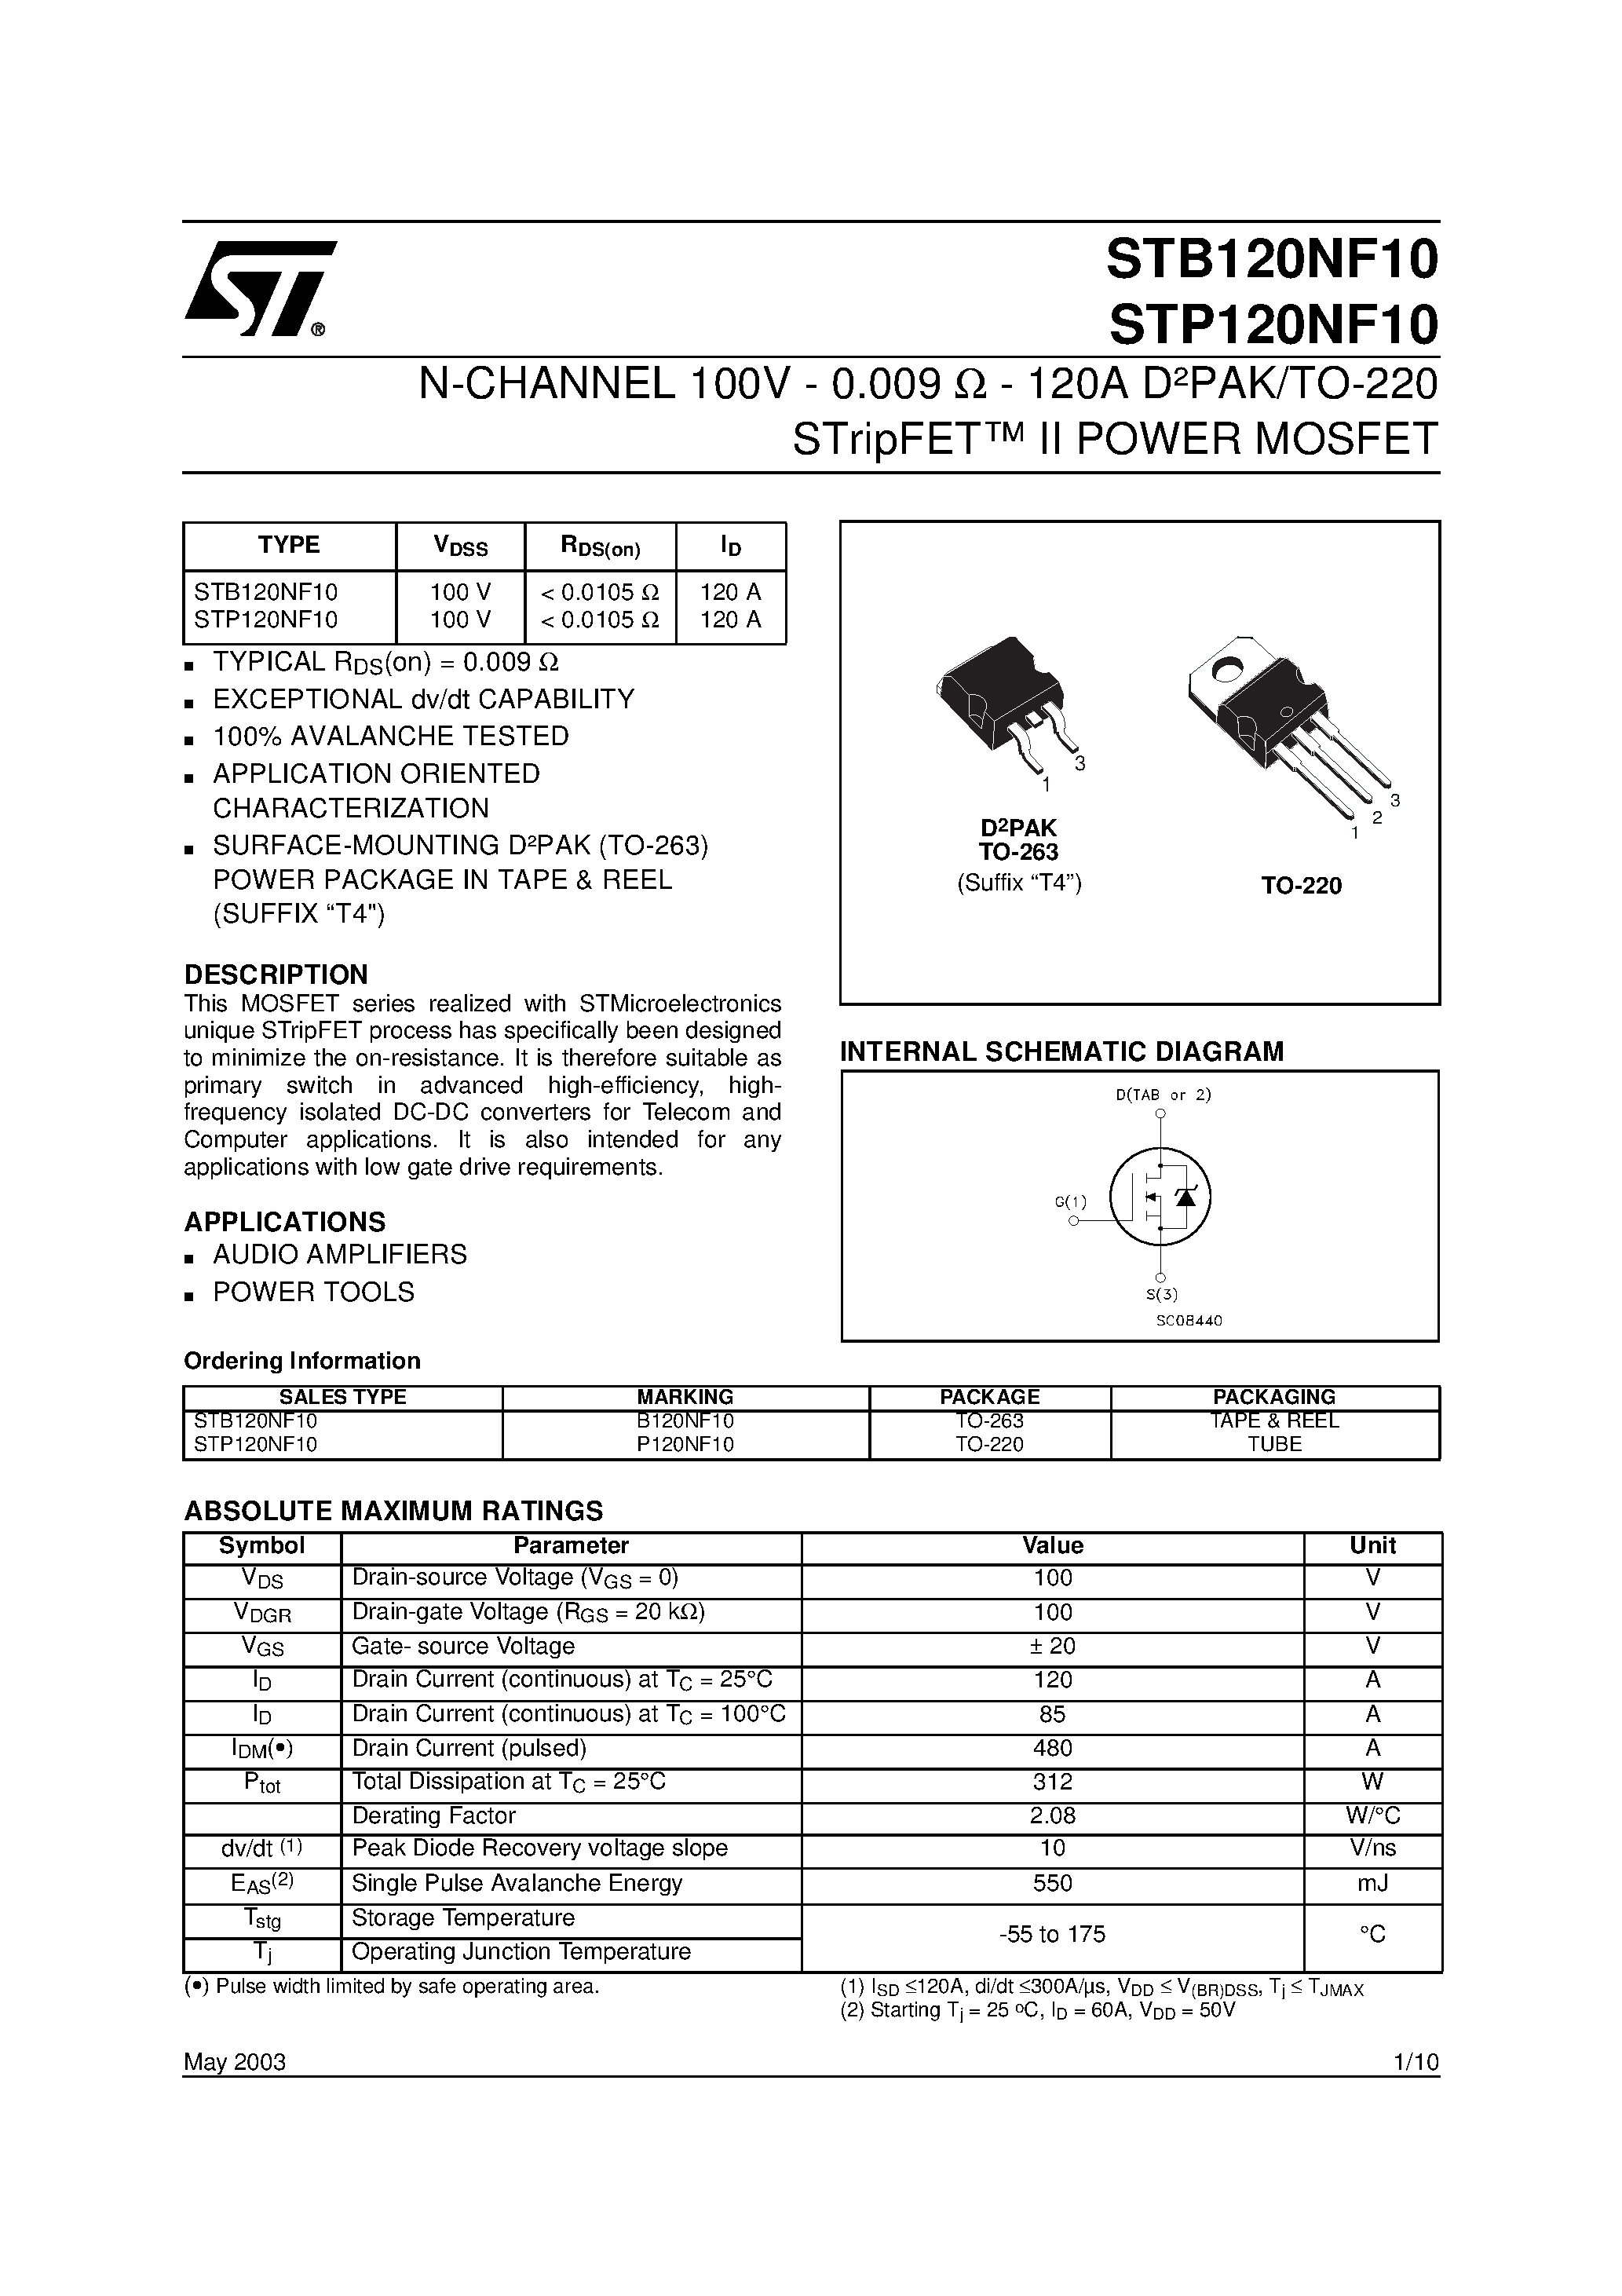 Datasheet STP120NF10 - N-CHANNEL 100V - 0.009 W - 120A DPAK/TO-220 STripFET II POWER MOSFET page 1